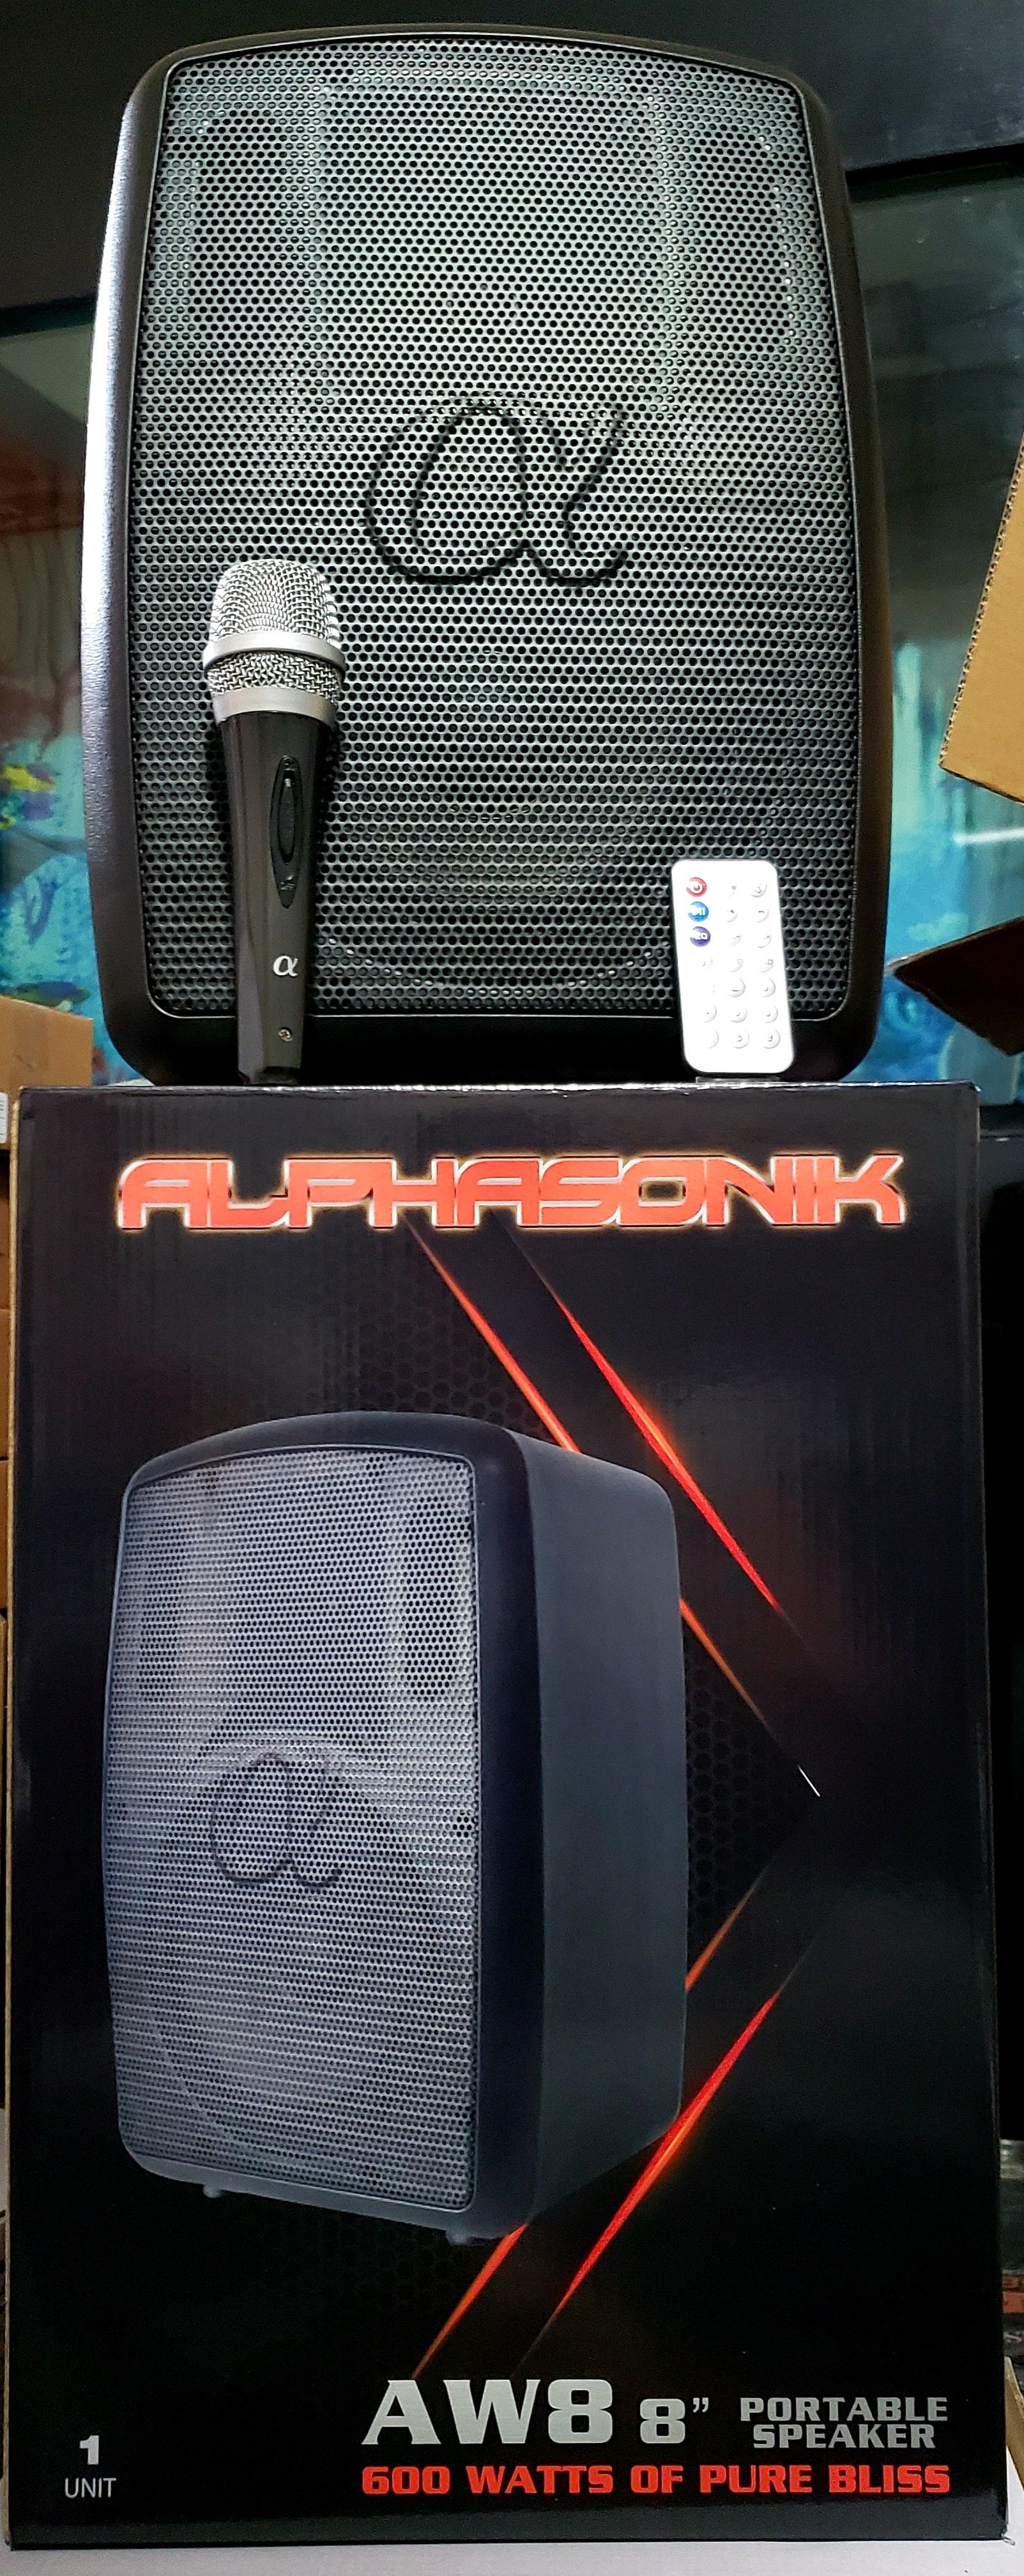 Alphasonik bluetooth portable loud speaker brand new with remote and microphone 🎤 👌